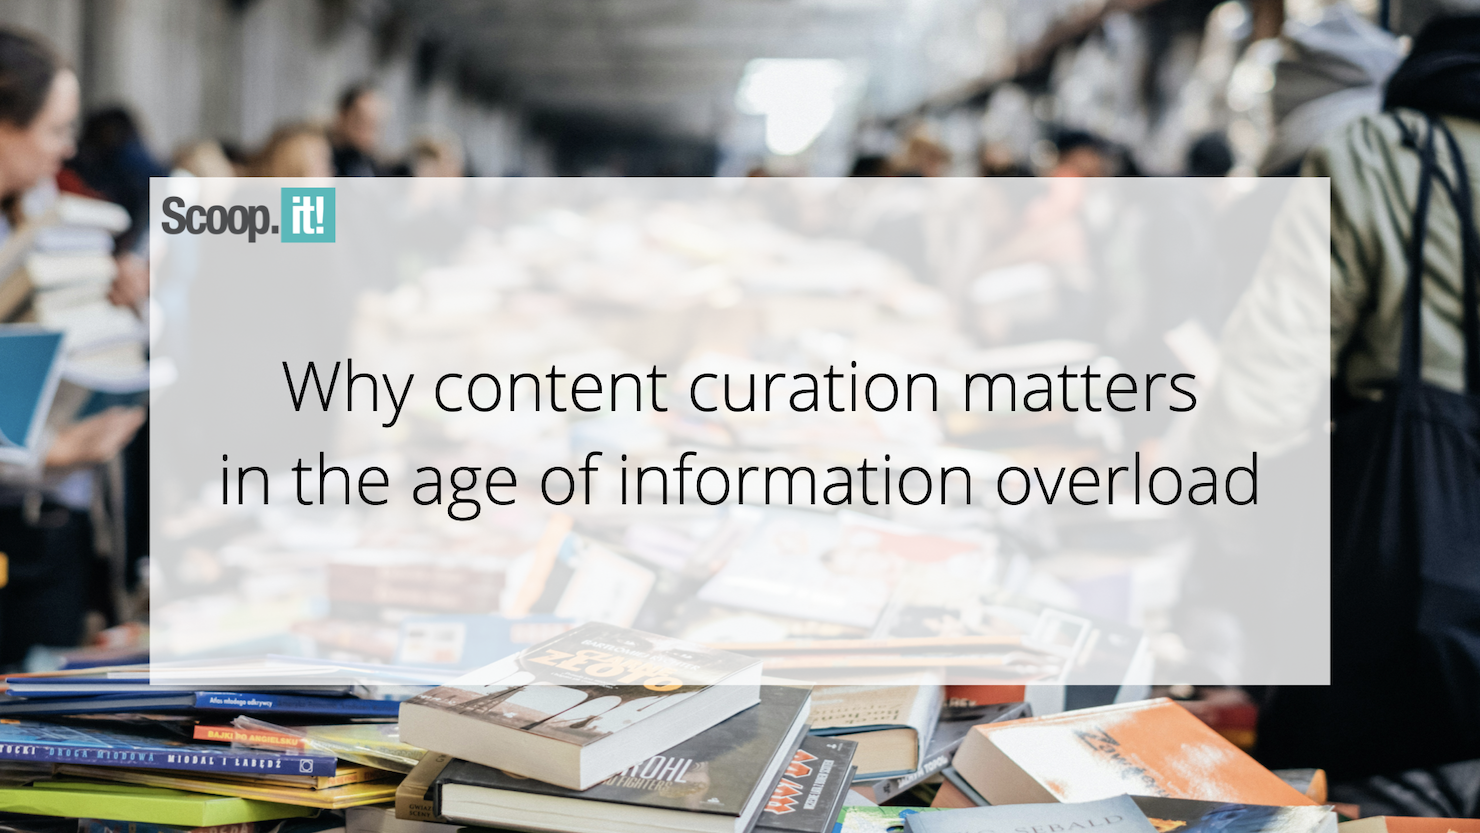 why-content-curation-matters-in-the-age-of-information-overload-–-scoop.it-blog